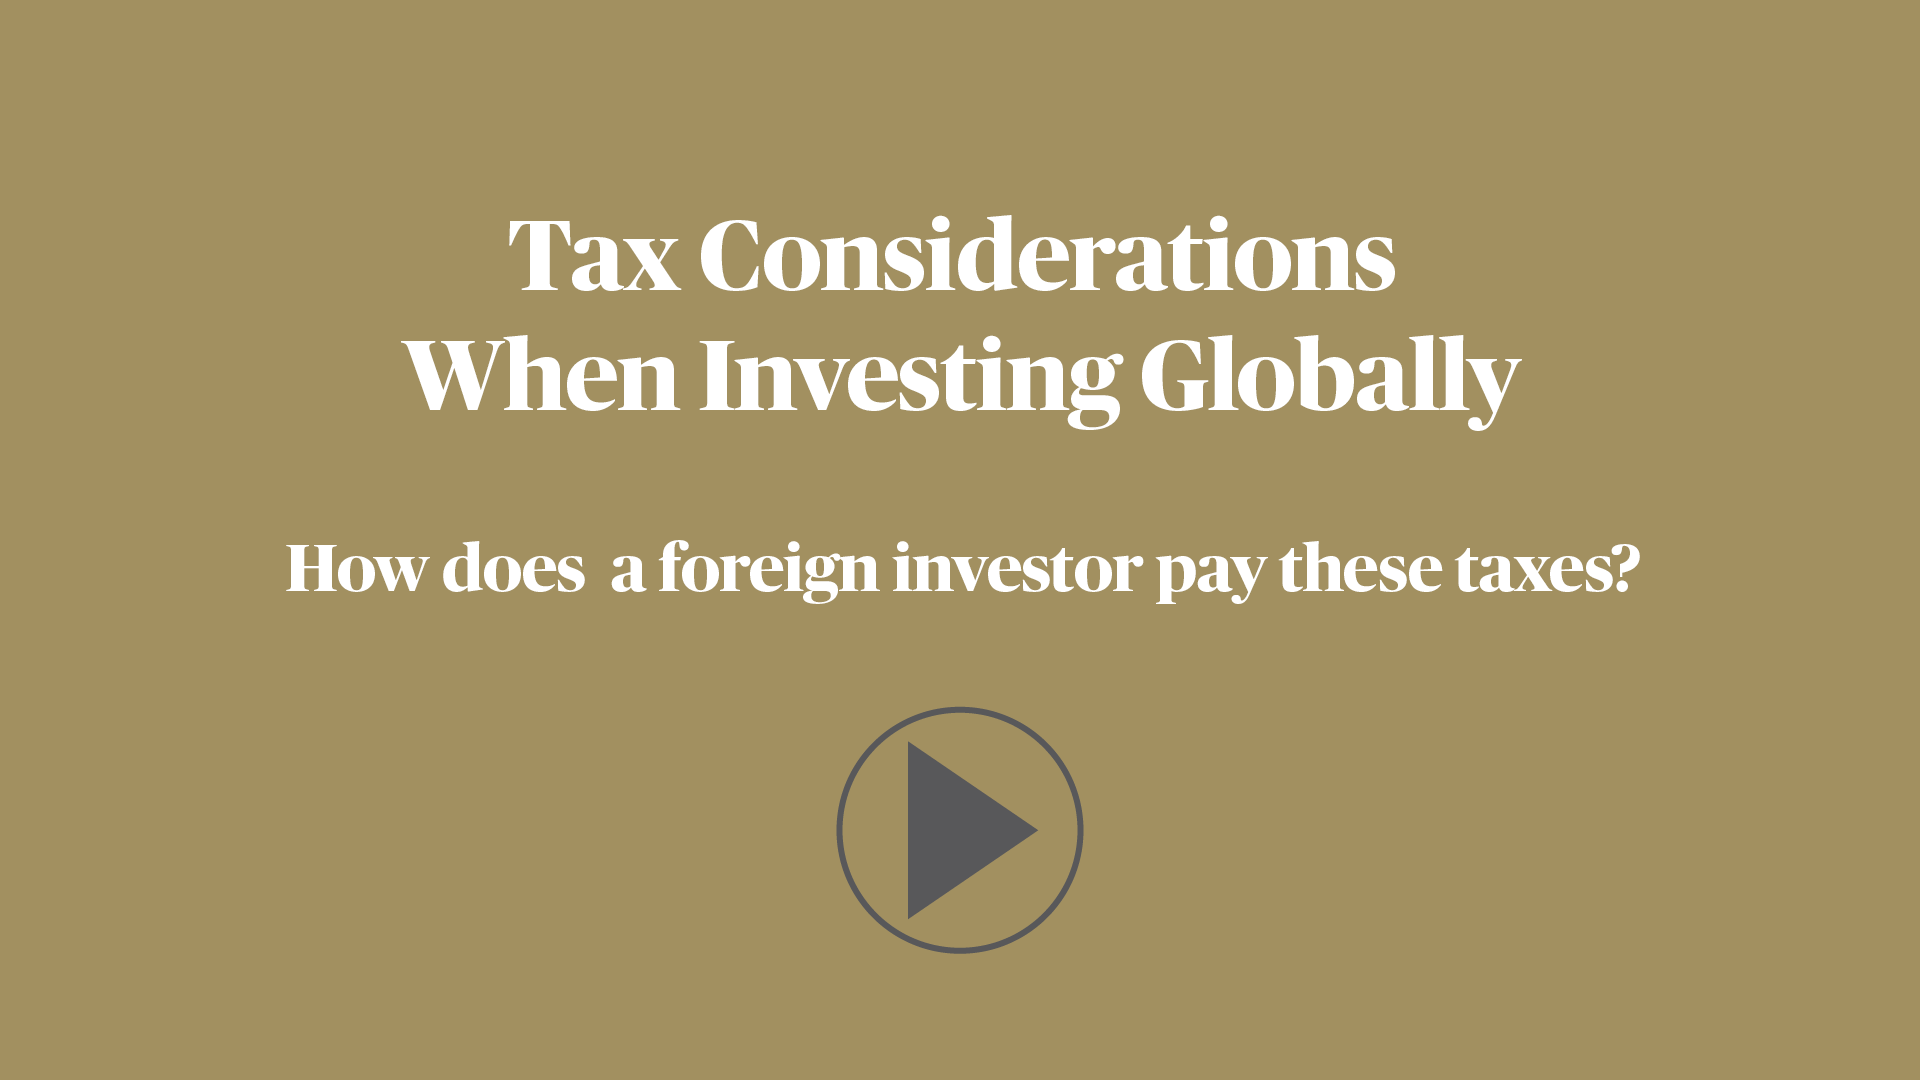 How does a foreign investor pay these taxes to the foreign tax authority?